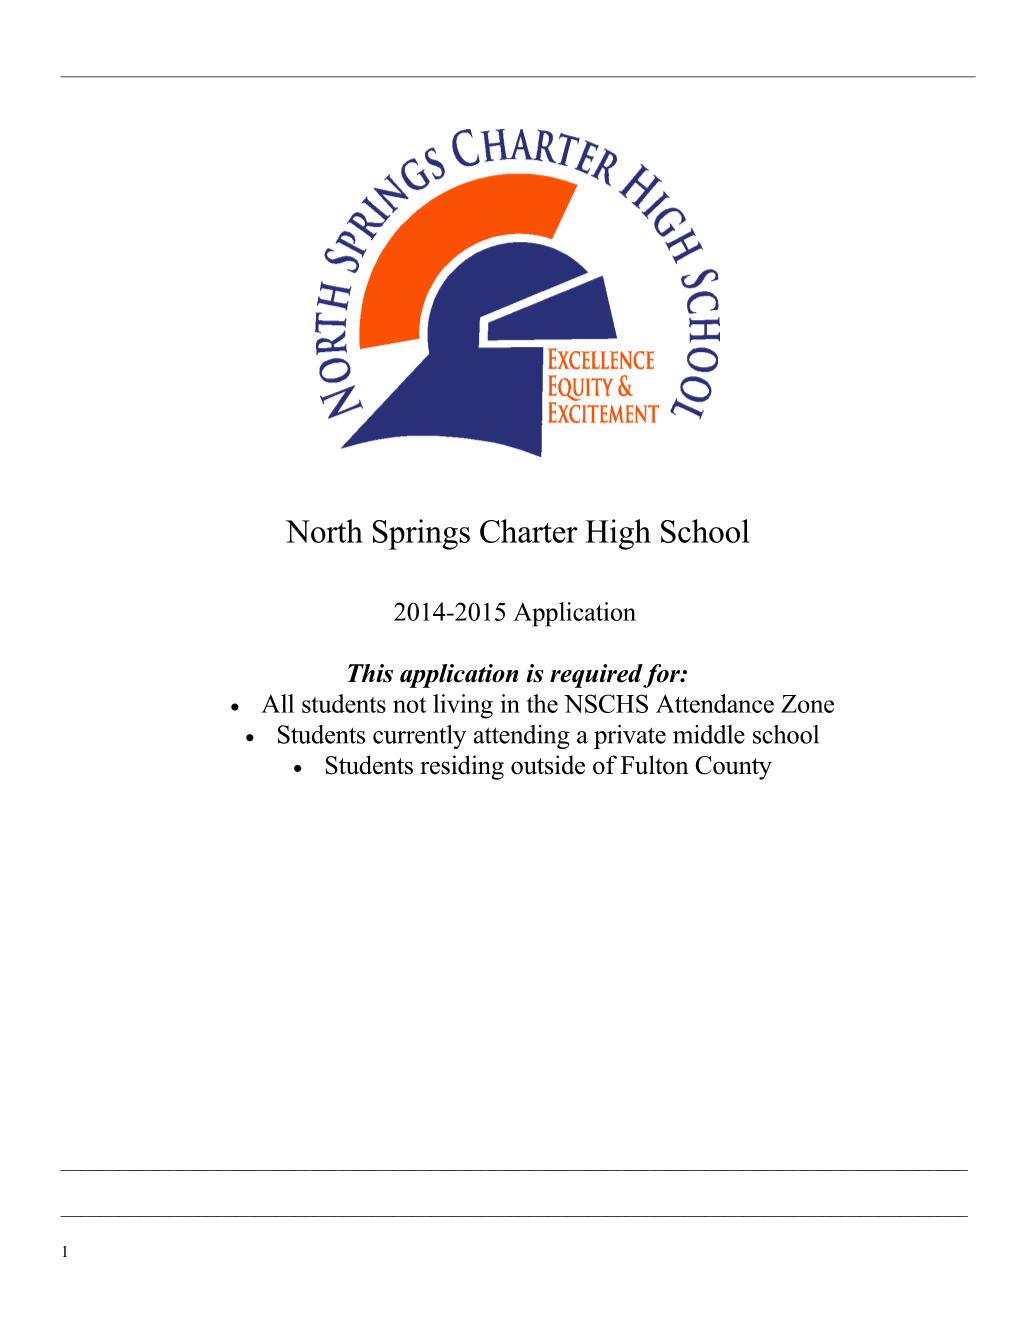 North Springs Application 2014-2015